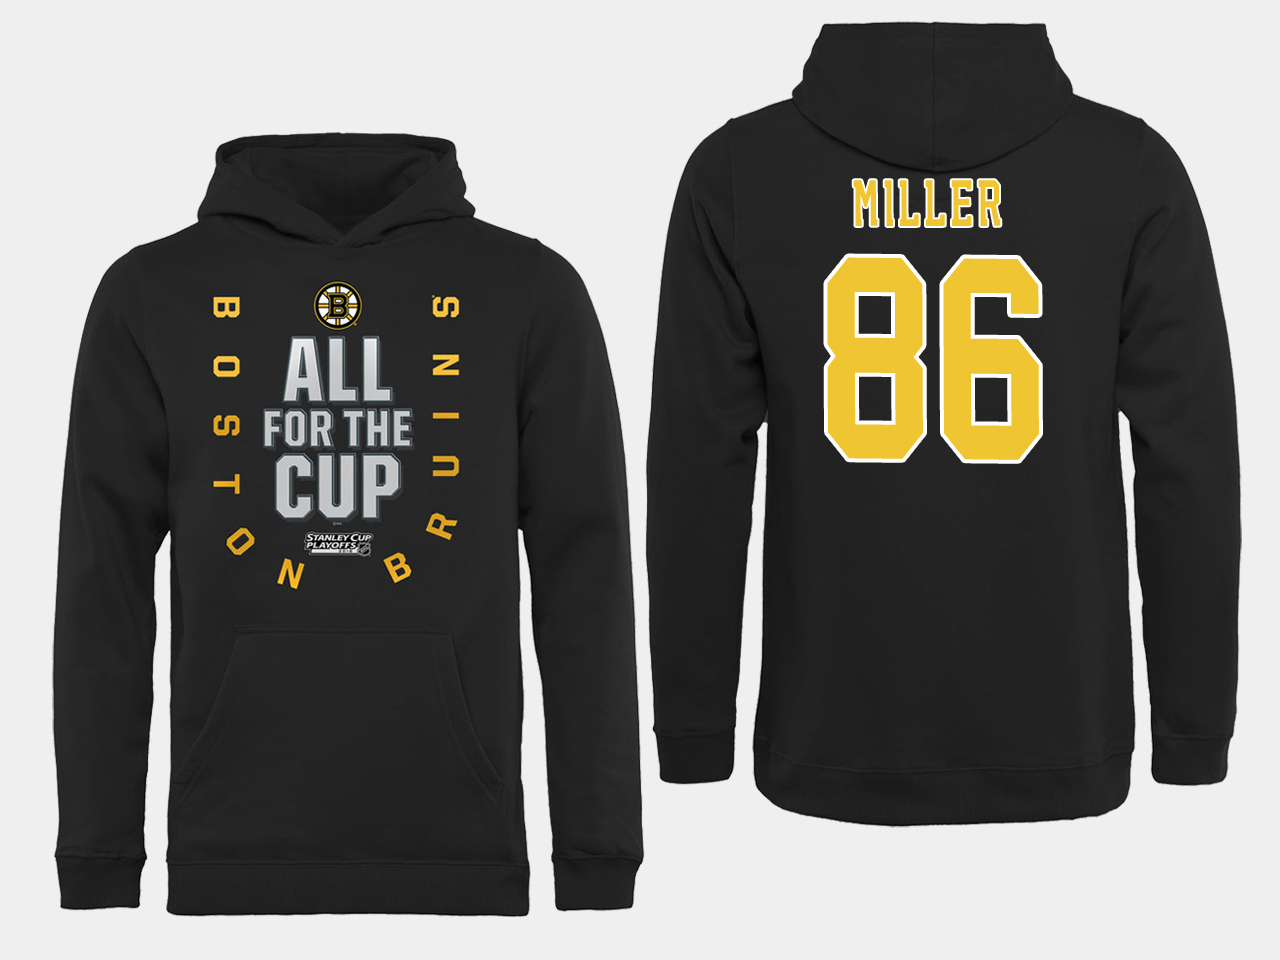 NHL Men Boston Bruins 86 Miller Black All for the Cup Hoodie